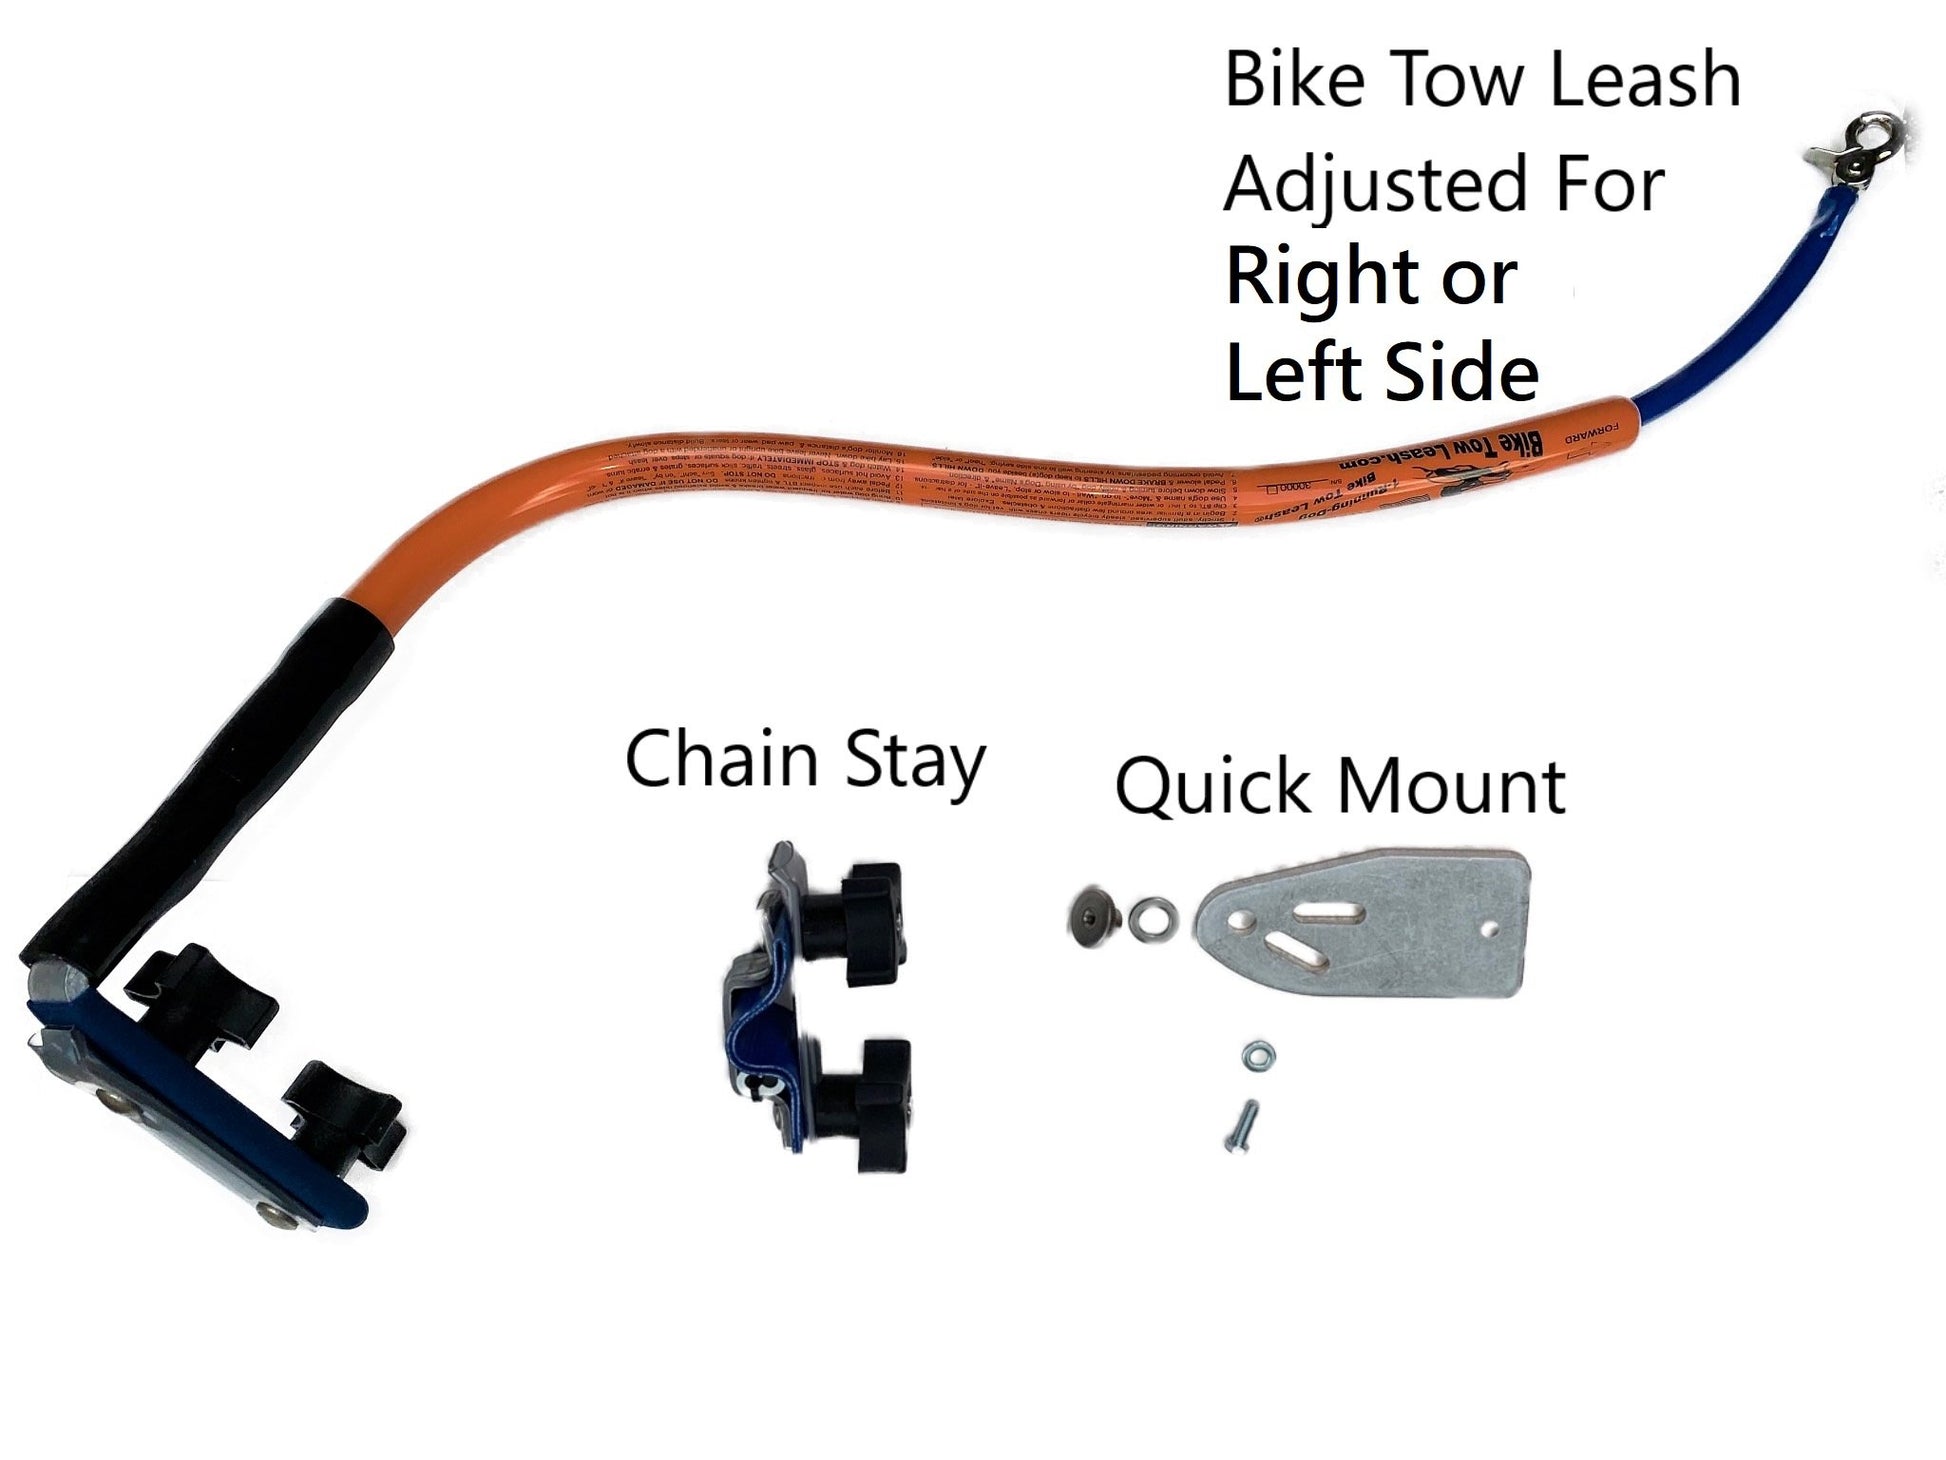 An orange Bike Tow Leash® with the words " Bike Tow Leash Adjusted for Right or Left side". Under it is A labeled Chain Stay Clamp with a blue protective shim and knobs. Beside it is a labeled Quick Mount plate with toothed washers, bolt, and recessed nut.